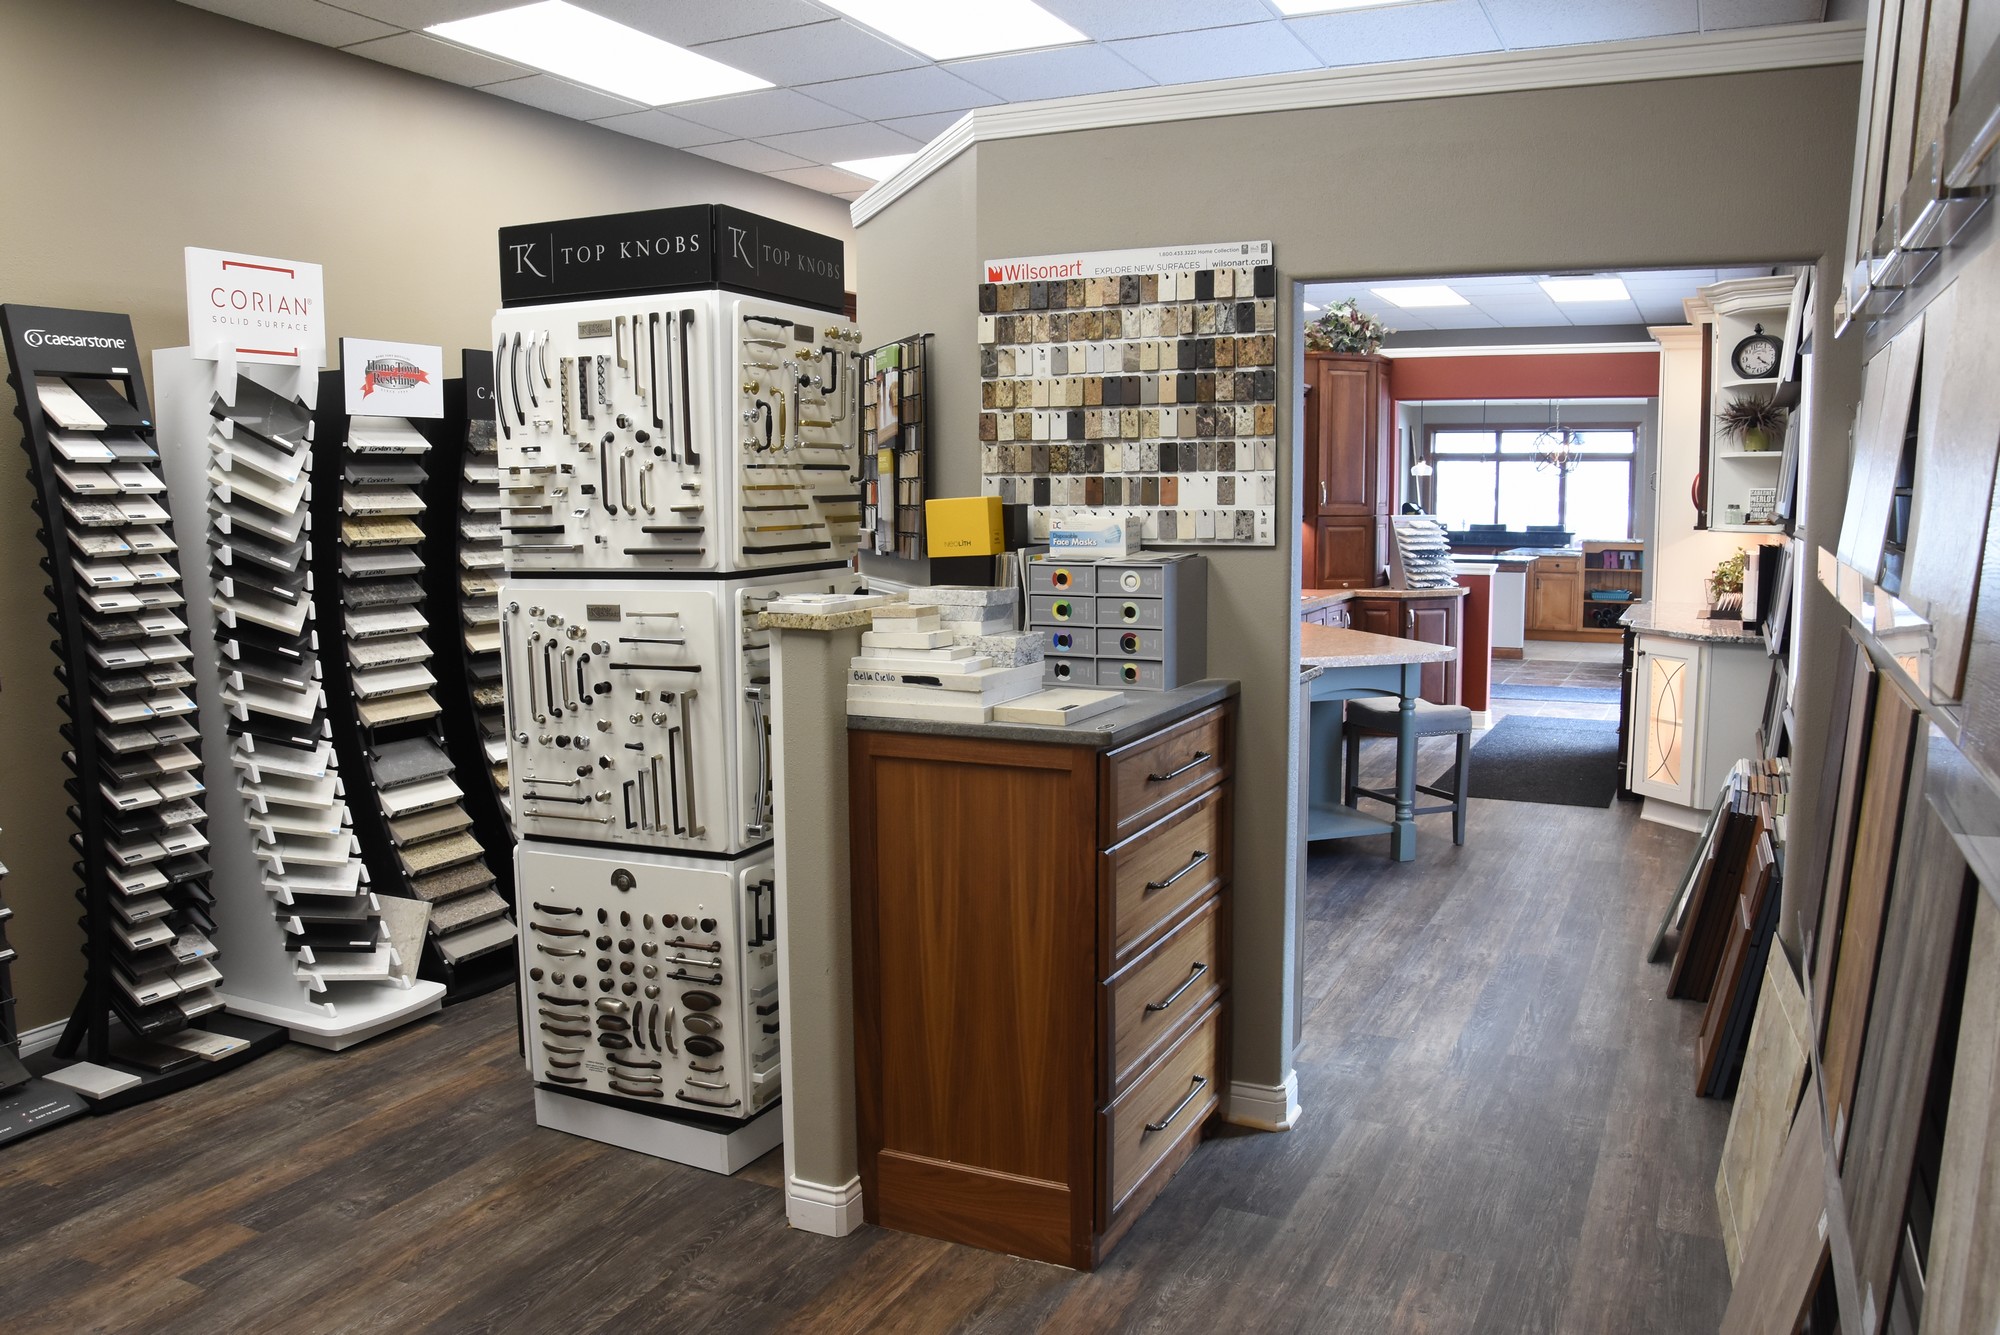 Home Town Restyling’s showroom with knobs, titles, and countertop material samples displayed